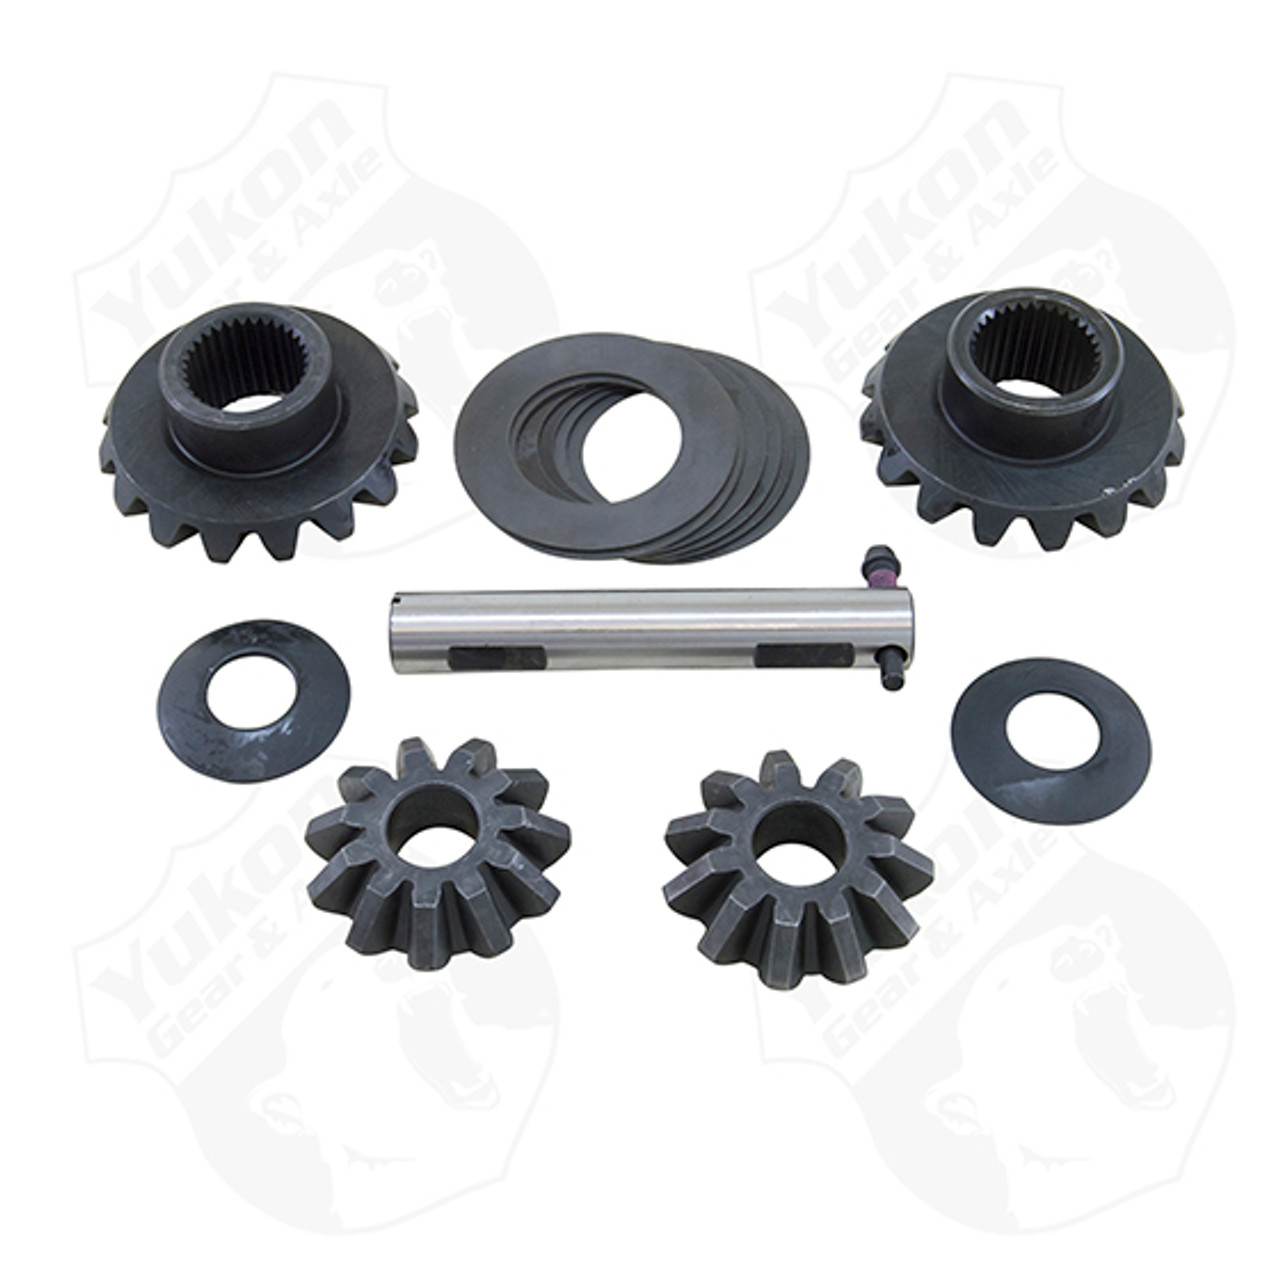 Yukon Spider Gear Kit Standard Open for 2010 & up Chrysler 9.25" ZF with 31-Spl Axles